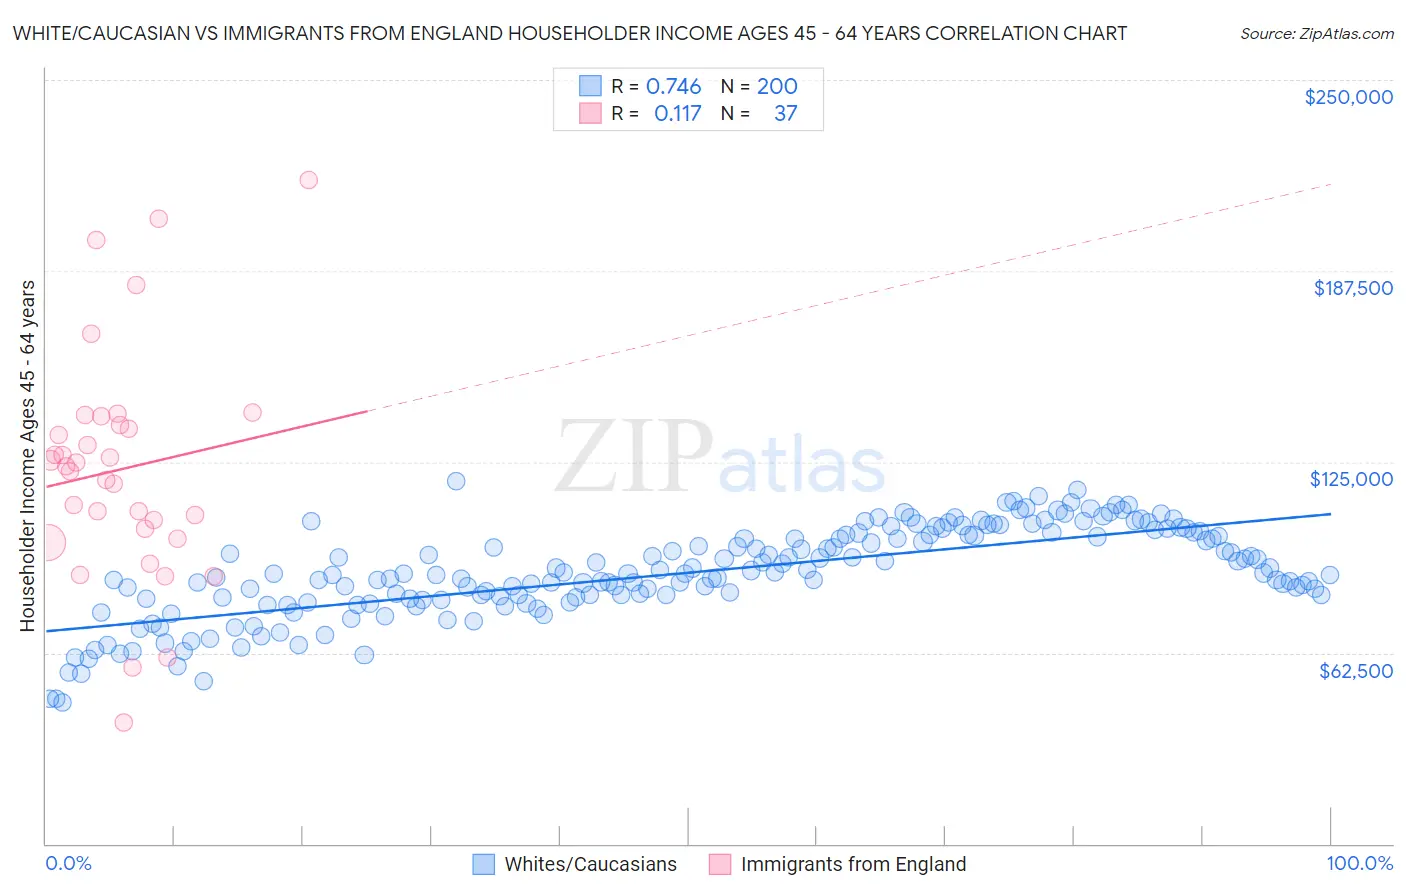 White/Caucasian vs Immigrants from England Householder Income Ages 45 - 64 years